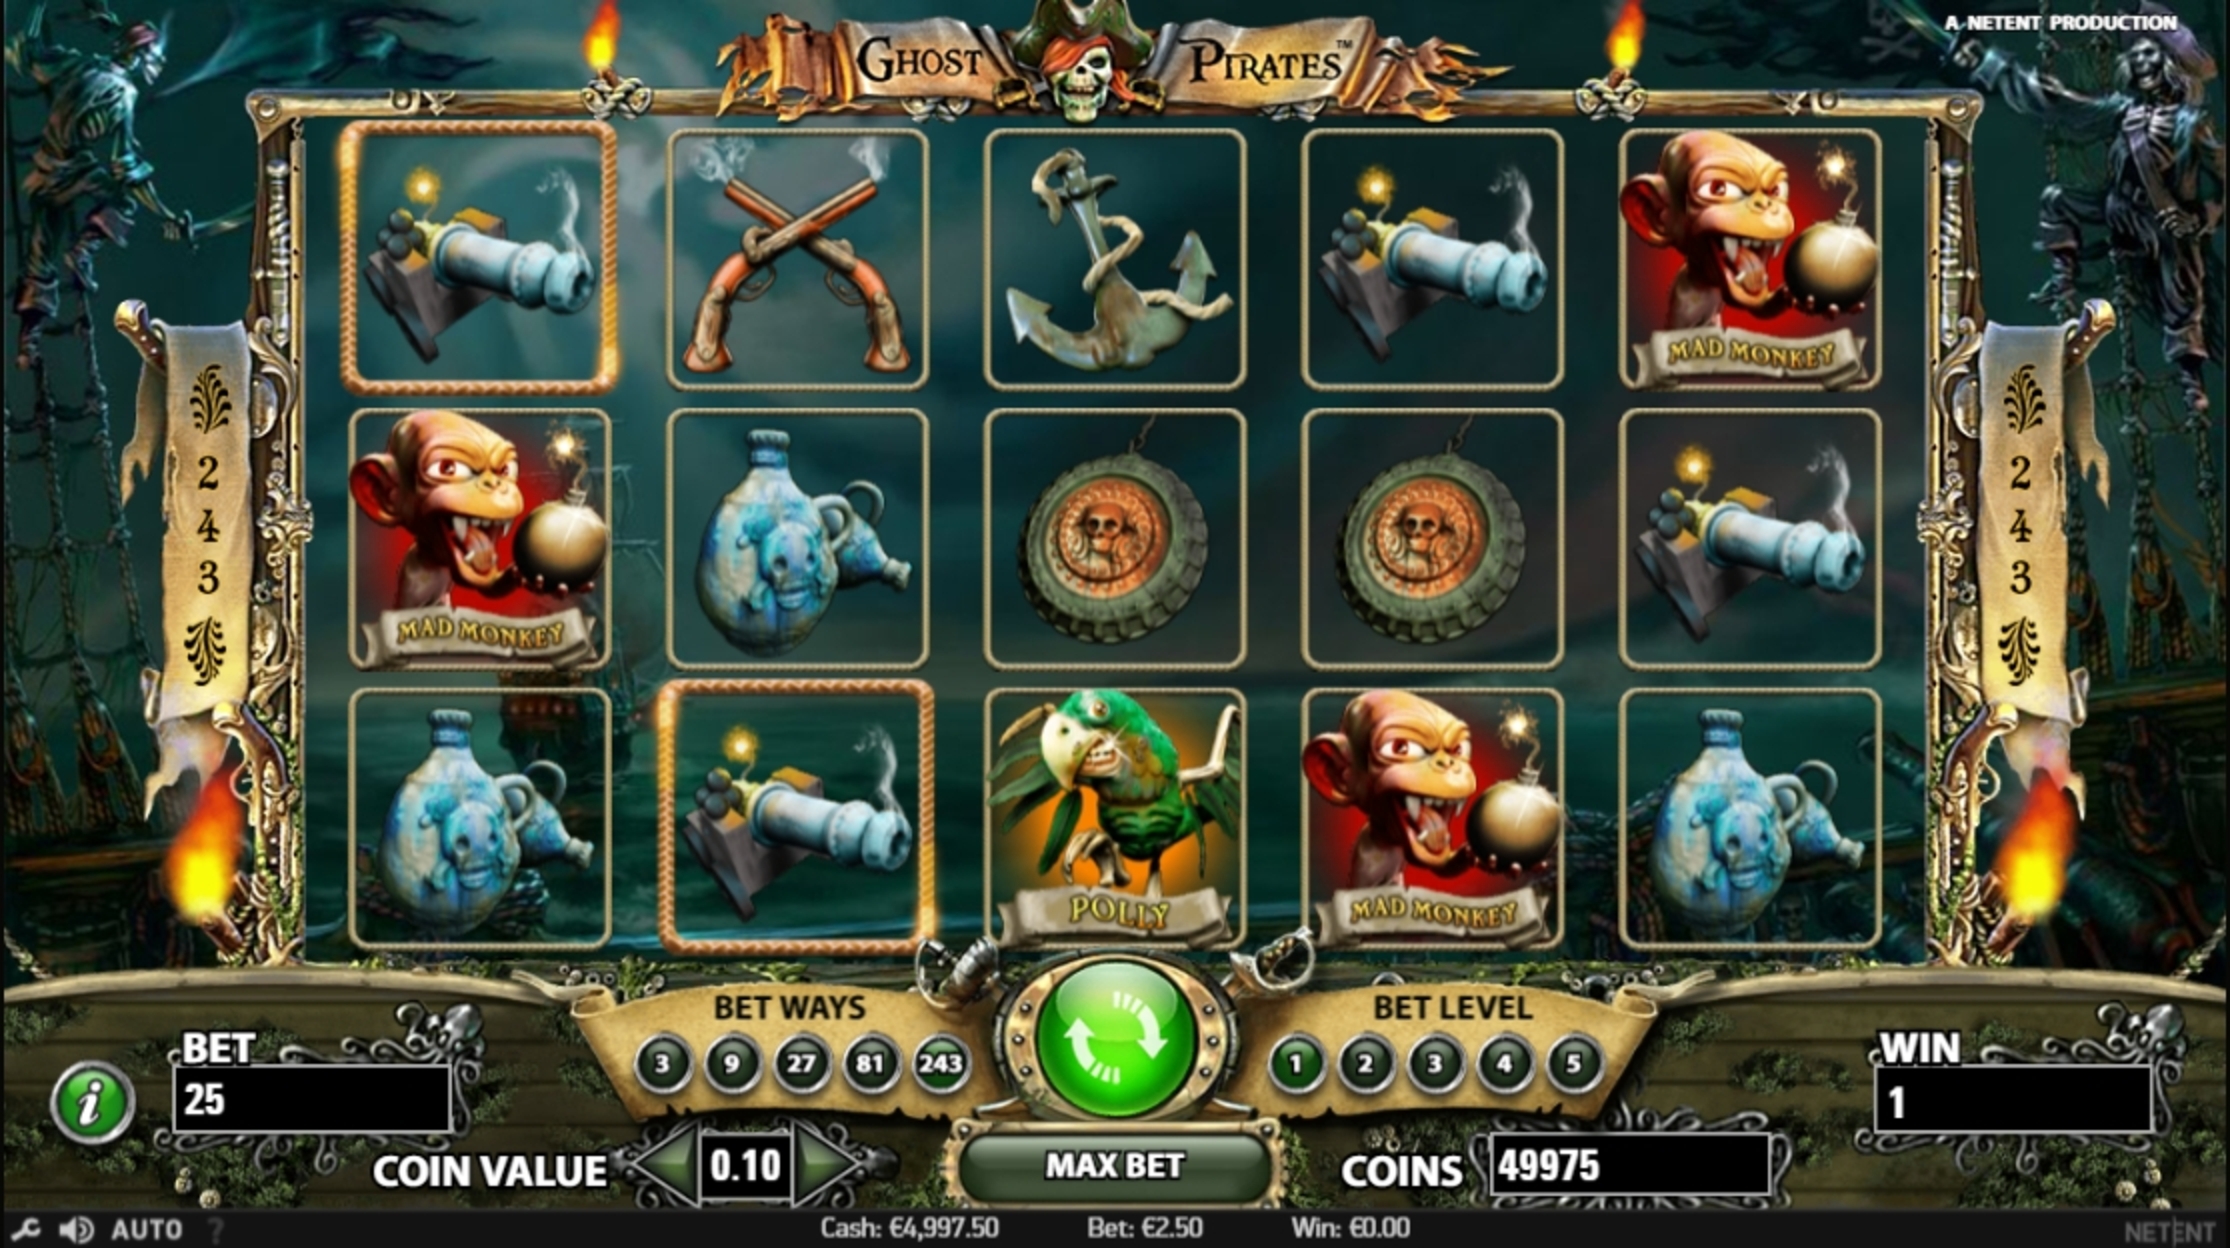 Win Money in Ghost Pirates Free Slot Game by NetEnt